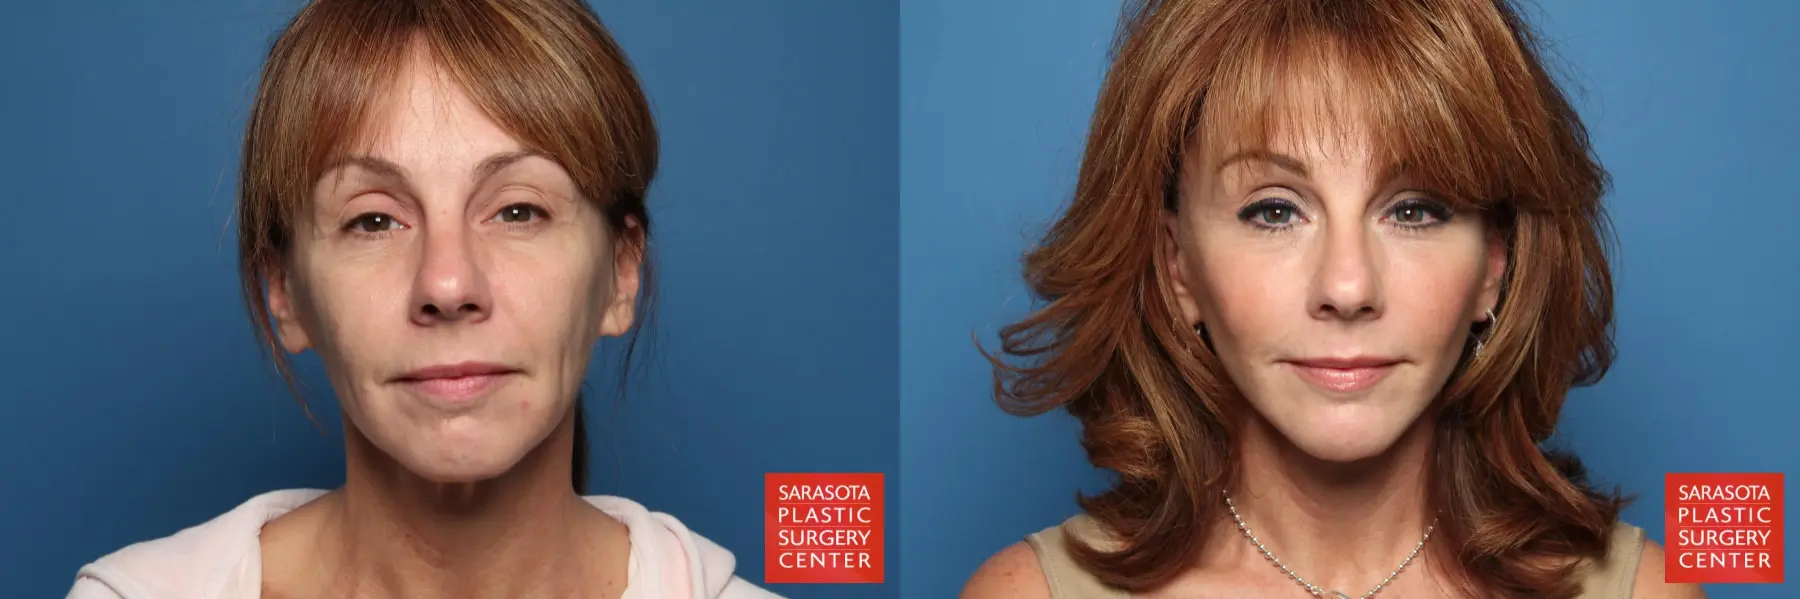 Cheek Lift: Patient 2 - Before and After 1